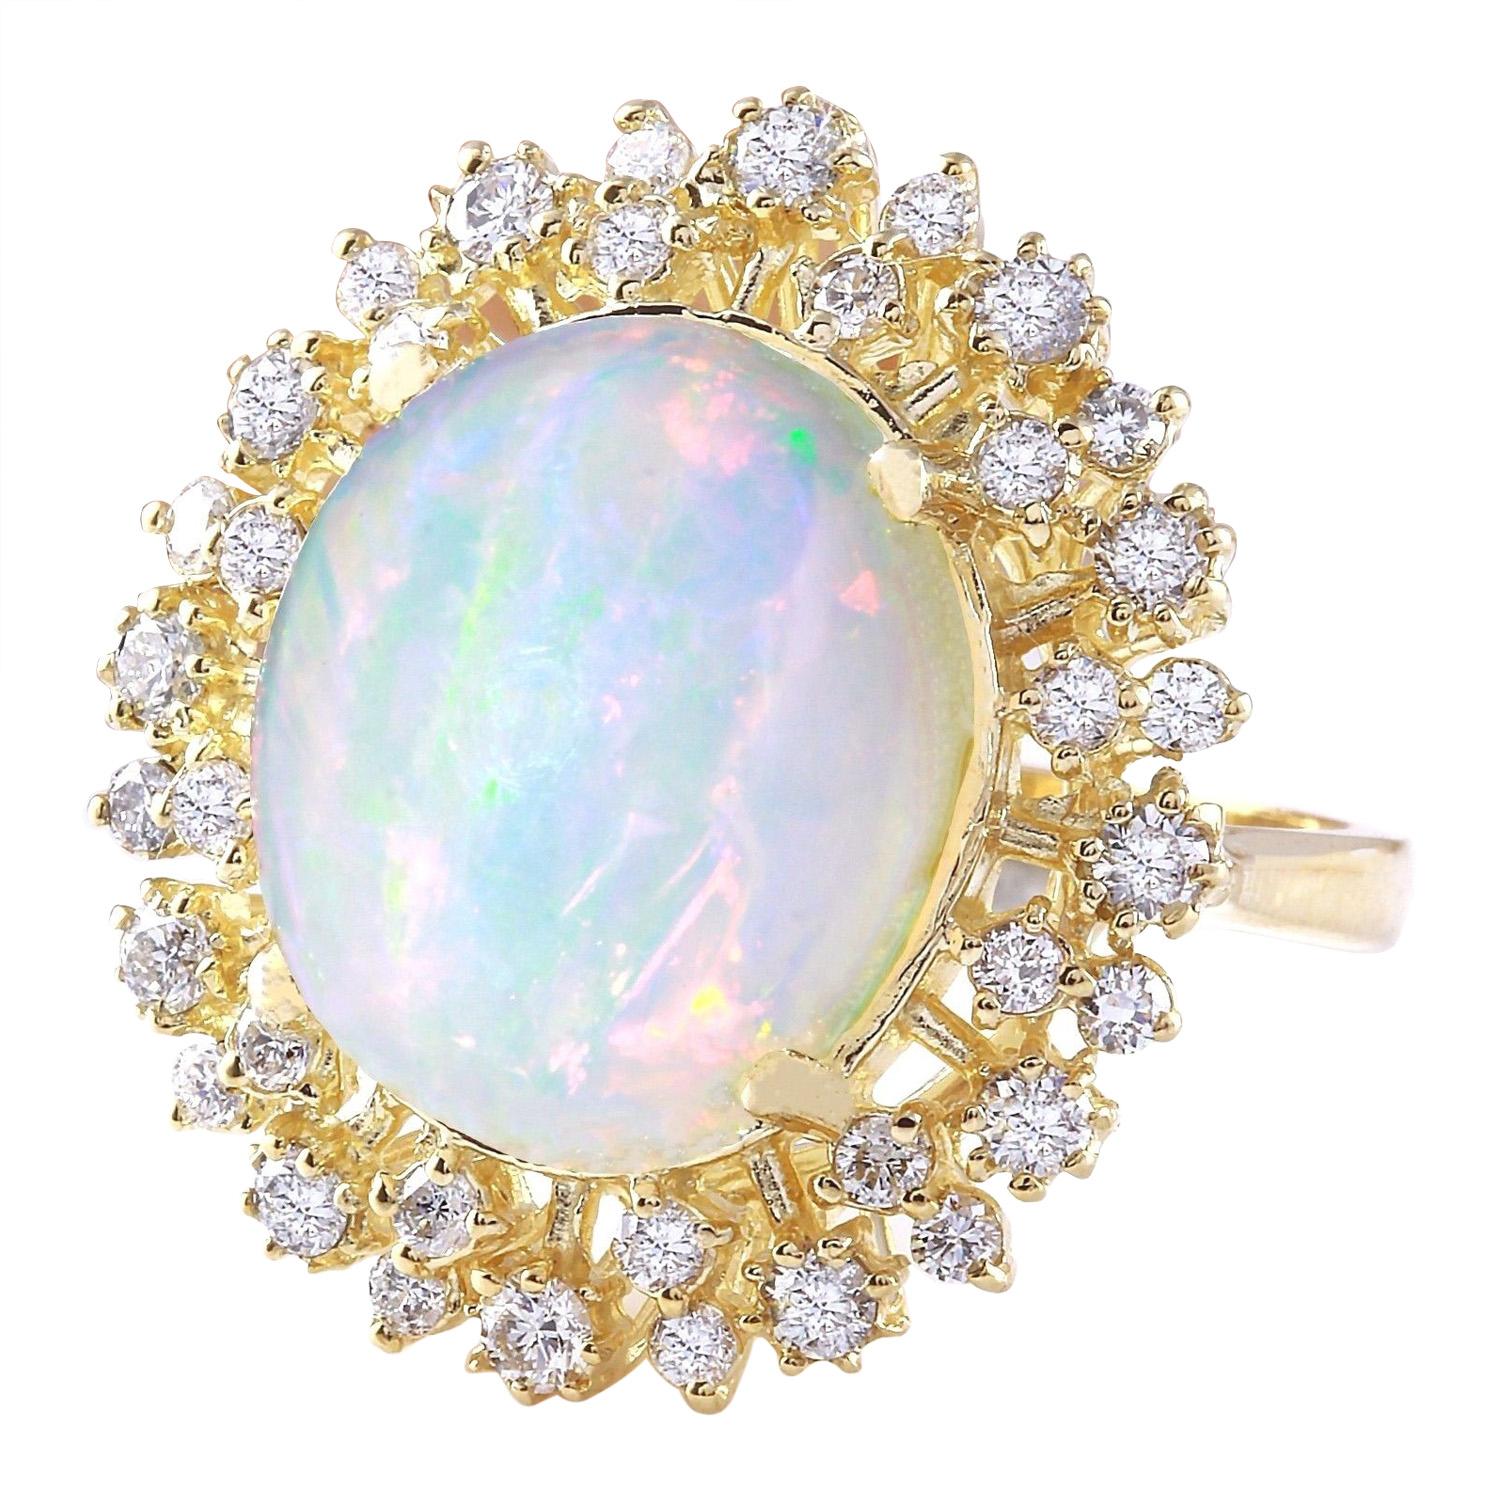 8.75 Carat Natural Opal 14K Solid Yellow Gold Diamond Ring
 Item Type: Ring
 Item Style: Cocktail
 Material: 14K Yellow Gold
 Mainstone: Opal
 Stone Color: Multicolor
 Stone Weight: 7.35 Carat
 Stone Shape: Oval
 Stone Quantity: 1
 Stone Dimensions: